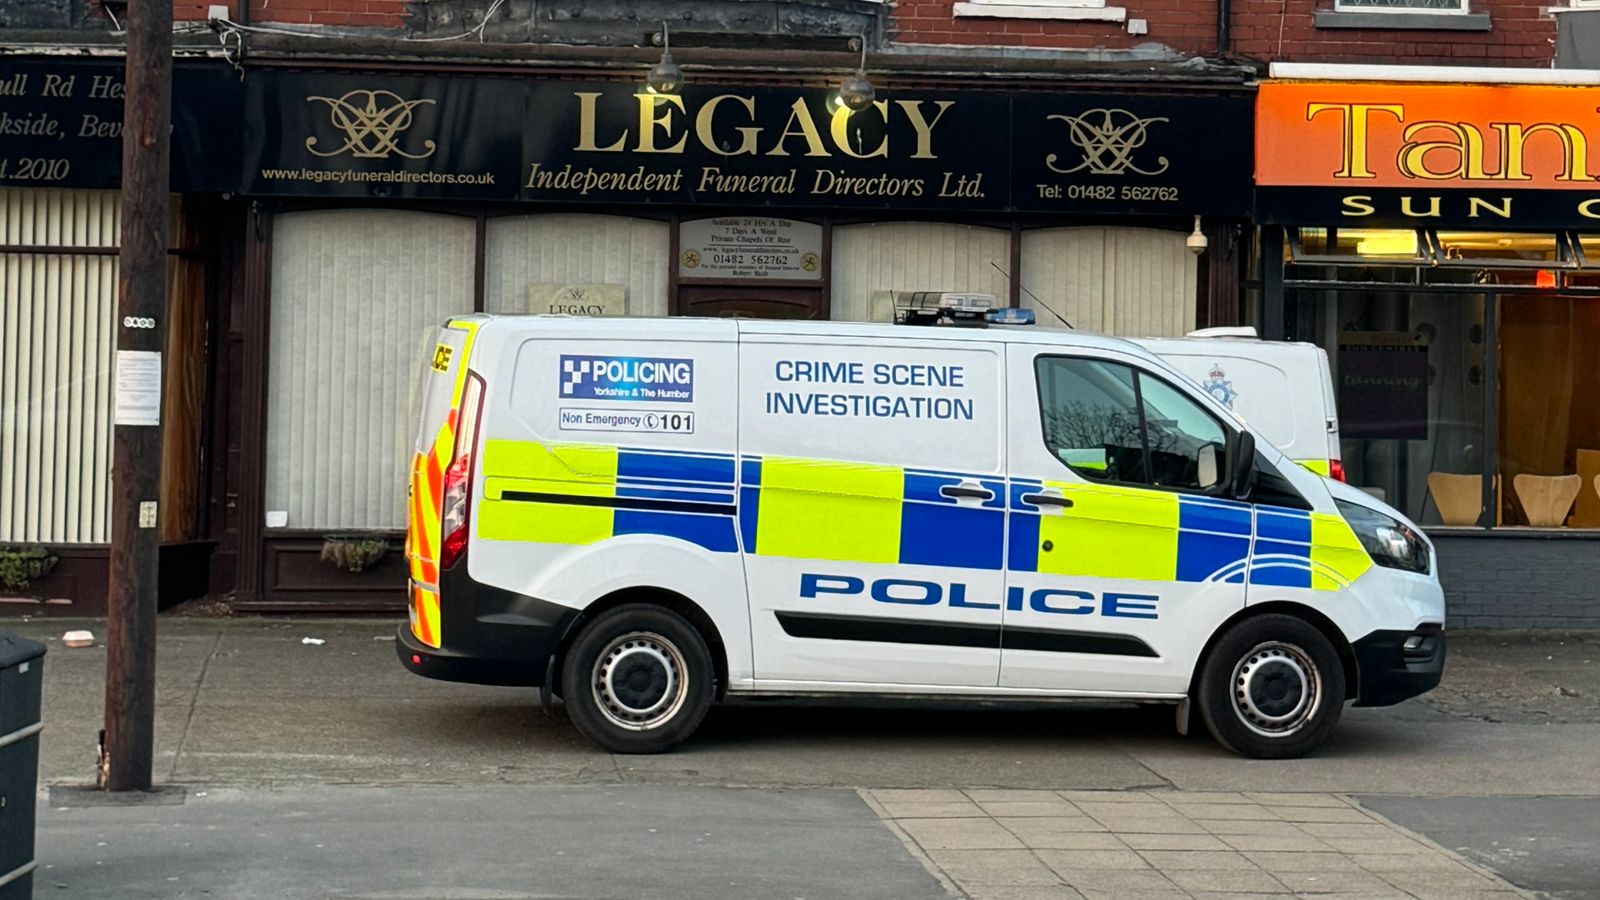 Bodies moved from funeral director by police in Hull after concerns raised